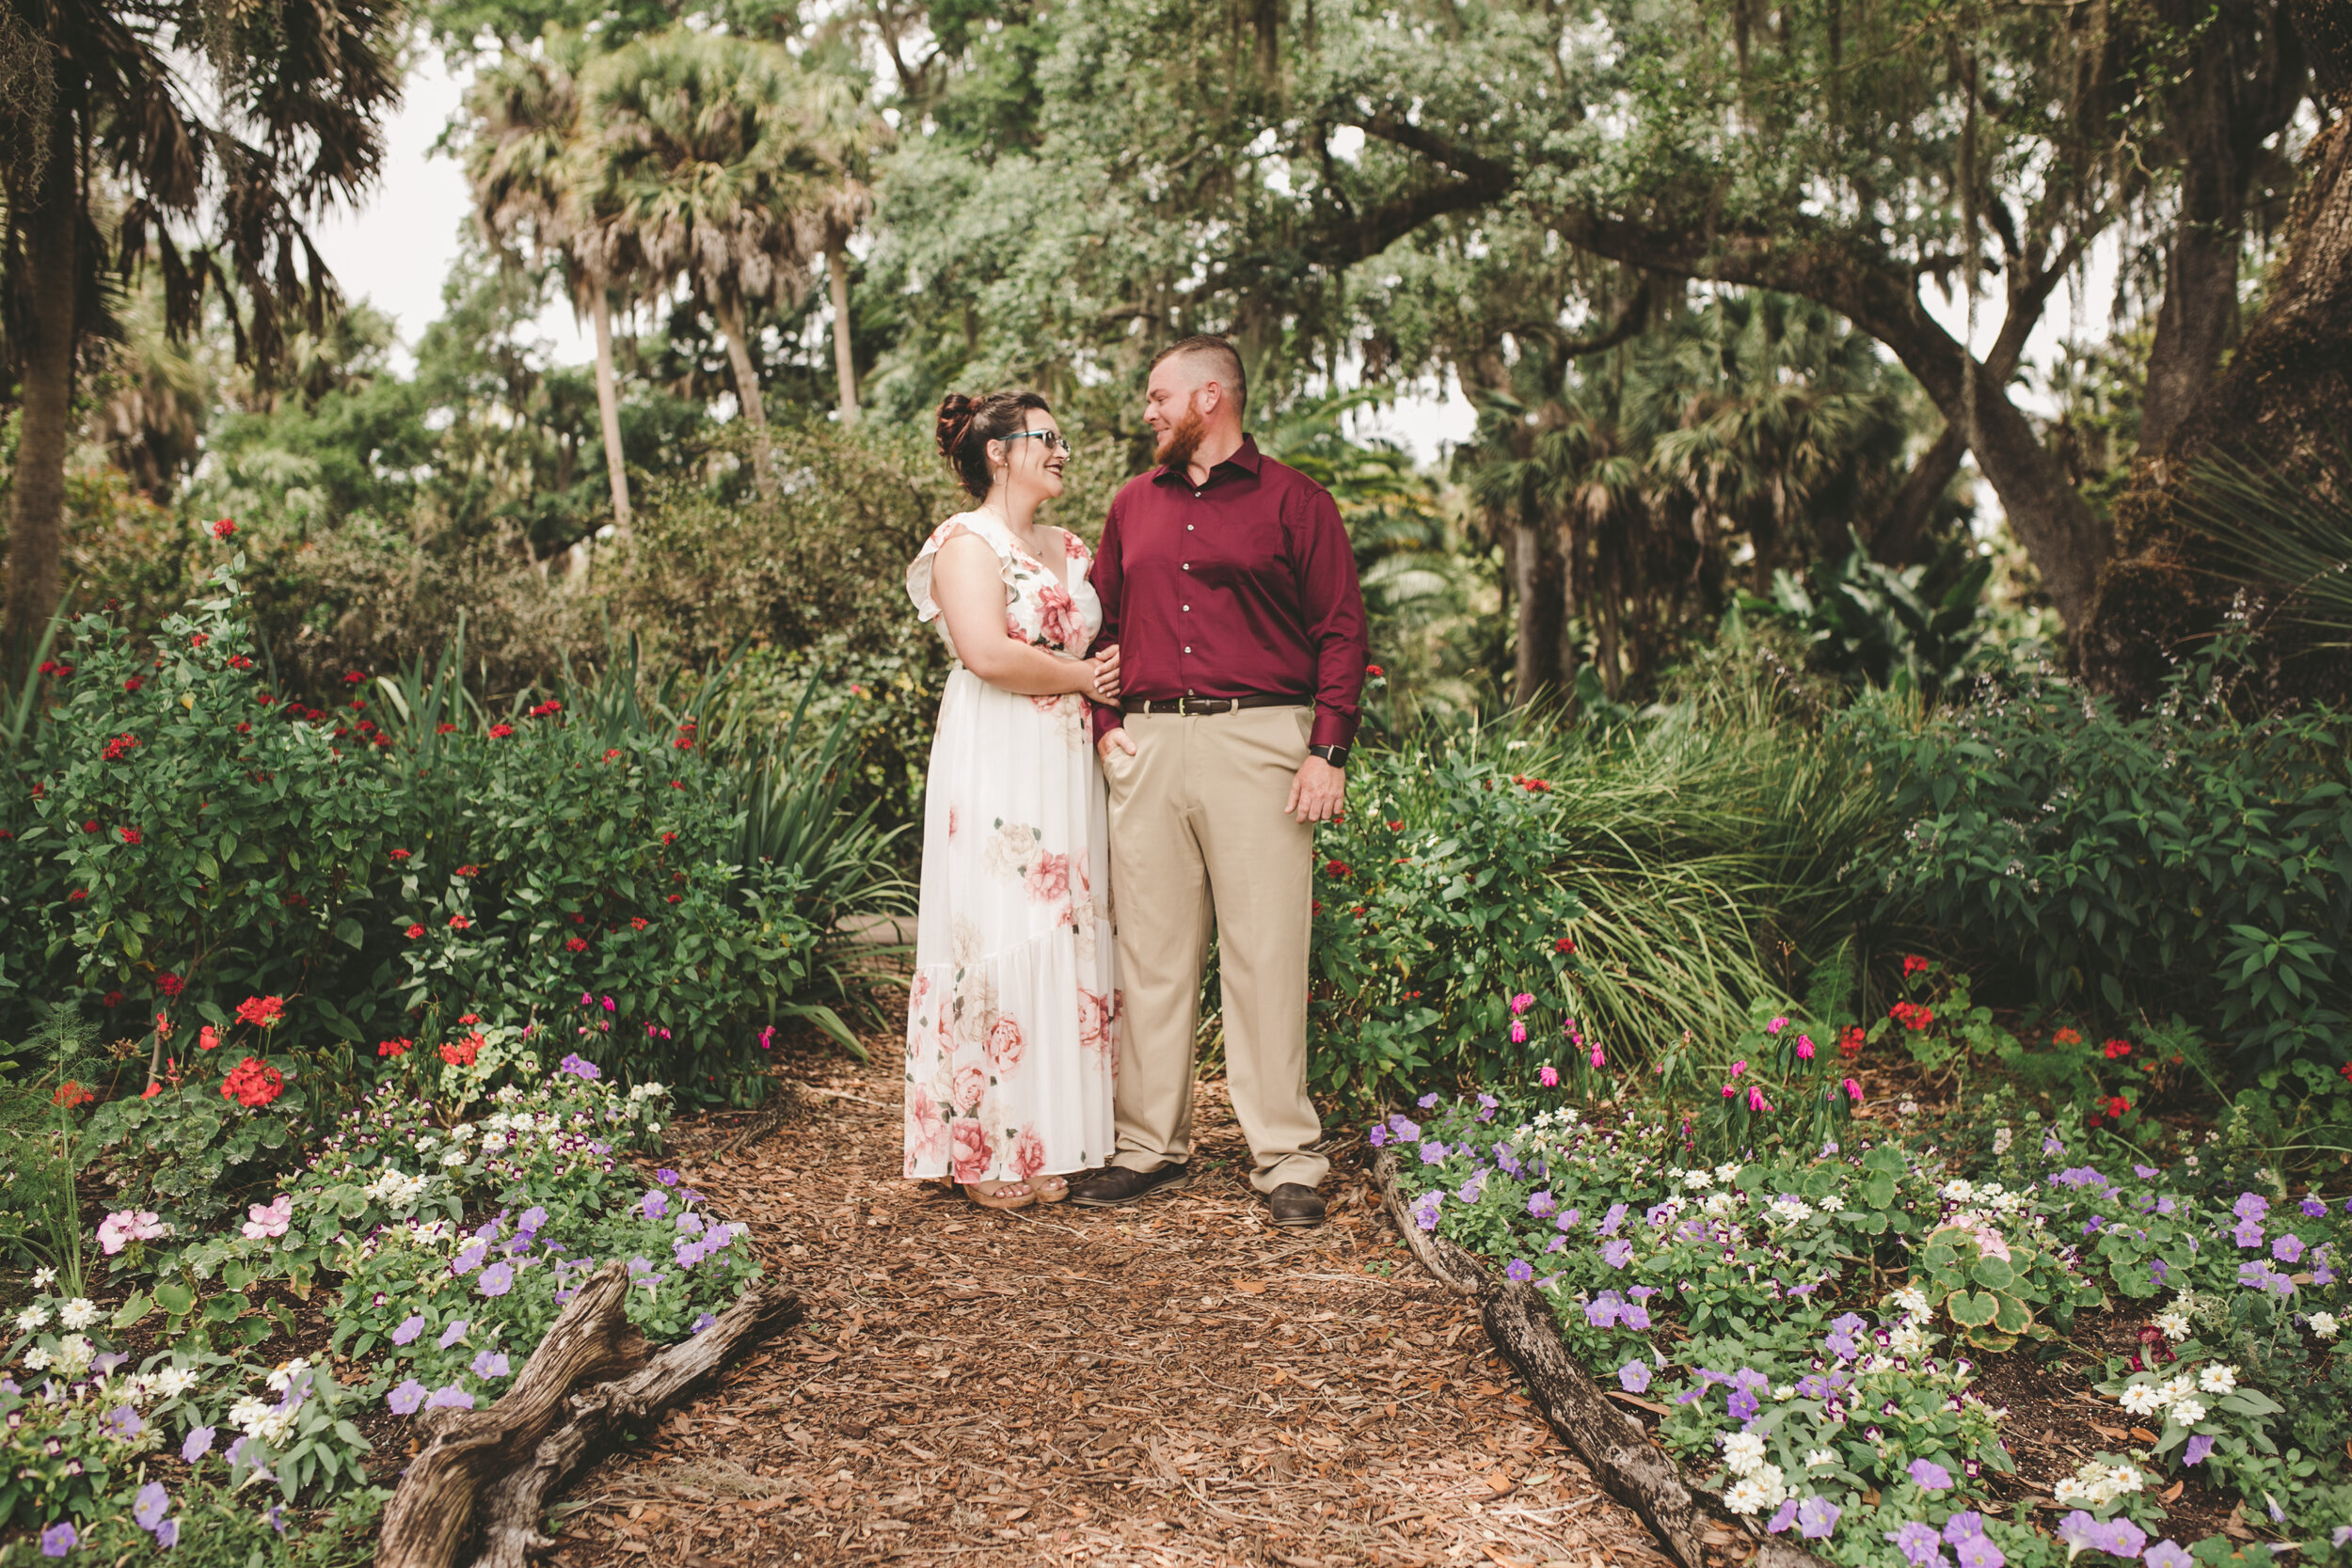 Engagement Sessions at Bok Tower Gardens in Lake Wales, FL